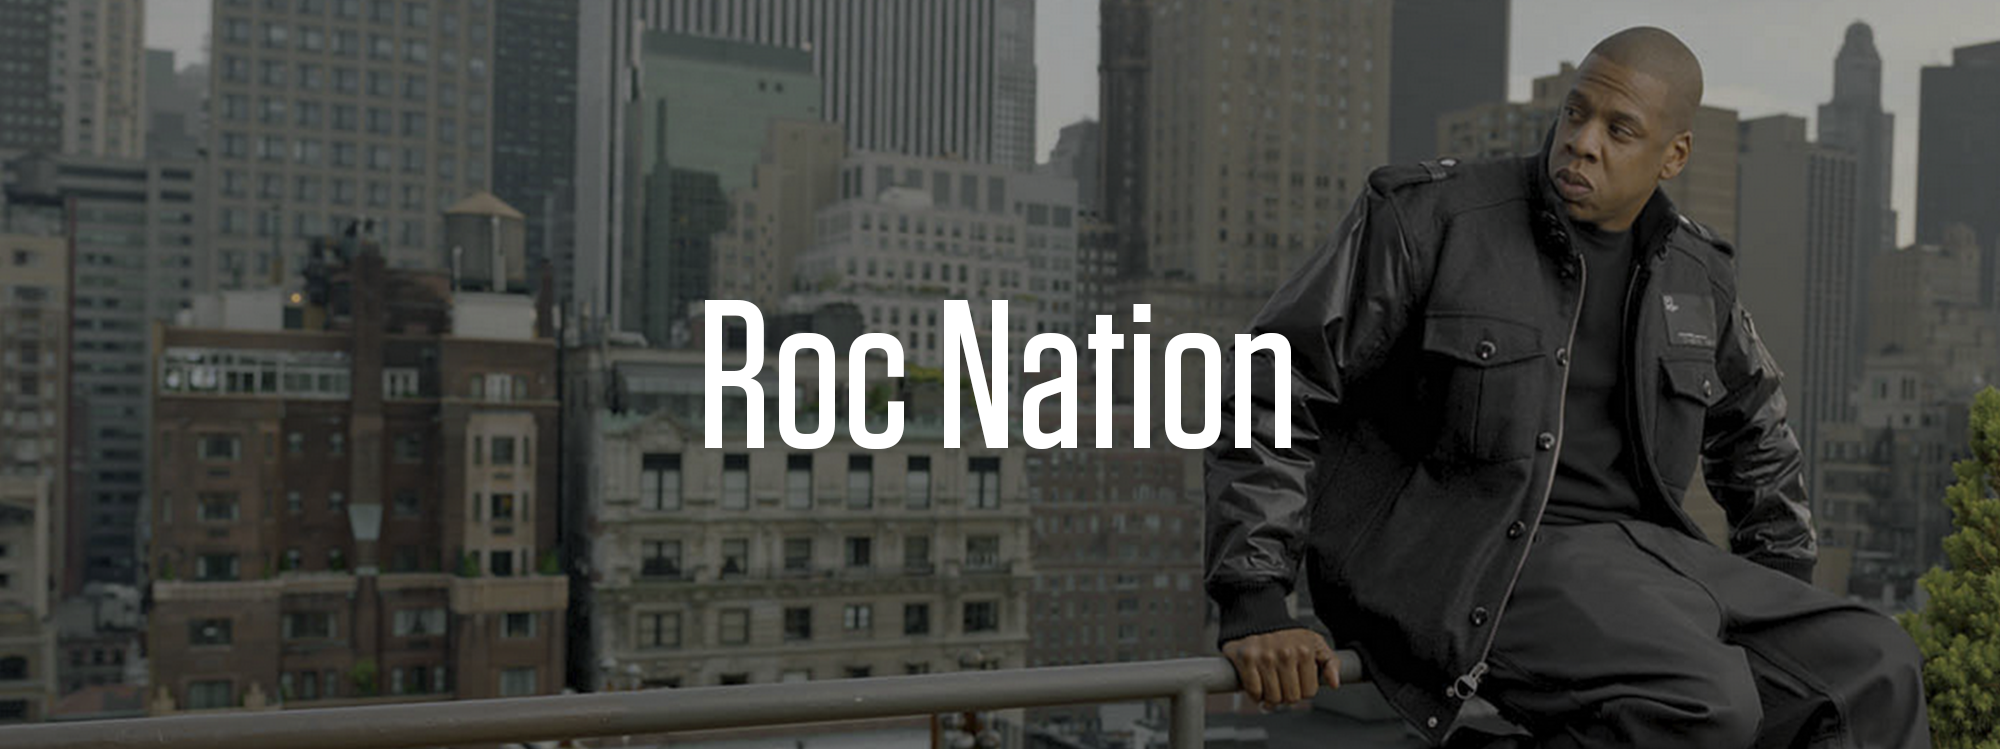 Jay Z’s company Roc Nation launching a new platform to fund startups